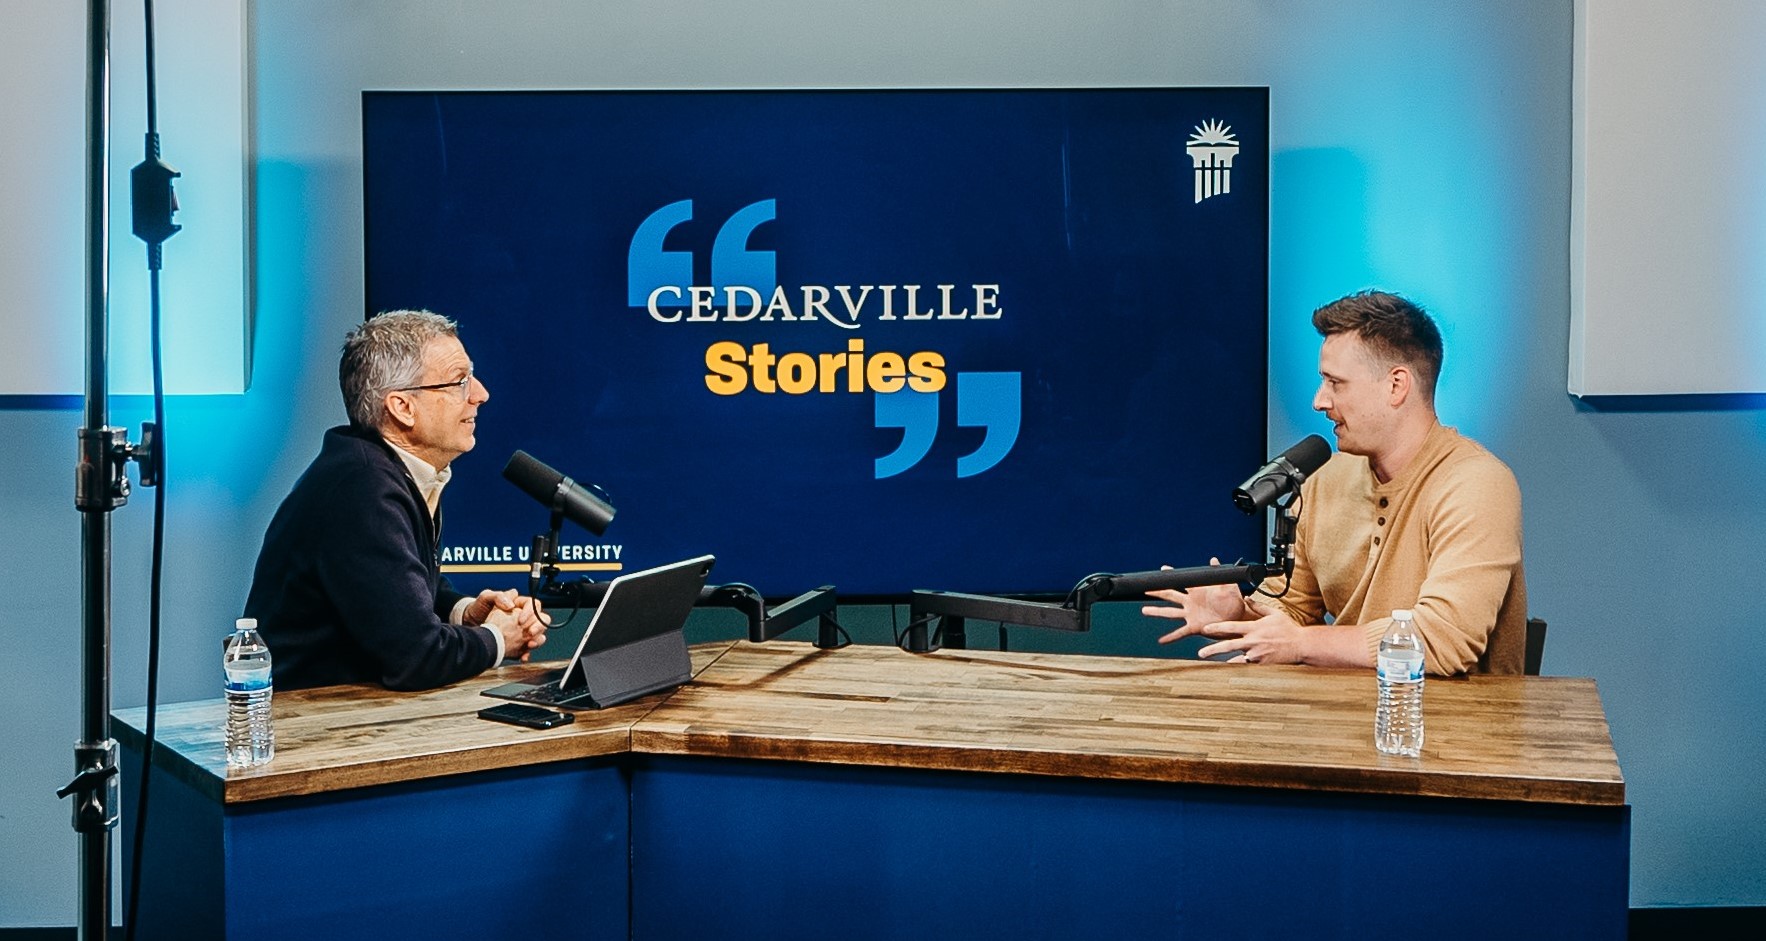 Parker Adams, right, talks with Mark Weinstein on a recent Cedarville Stories Podcast. Their topic centered on the movie-making industry and the most recent movie Parked edited, Unsung Hero, which releases nationally on April 26.